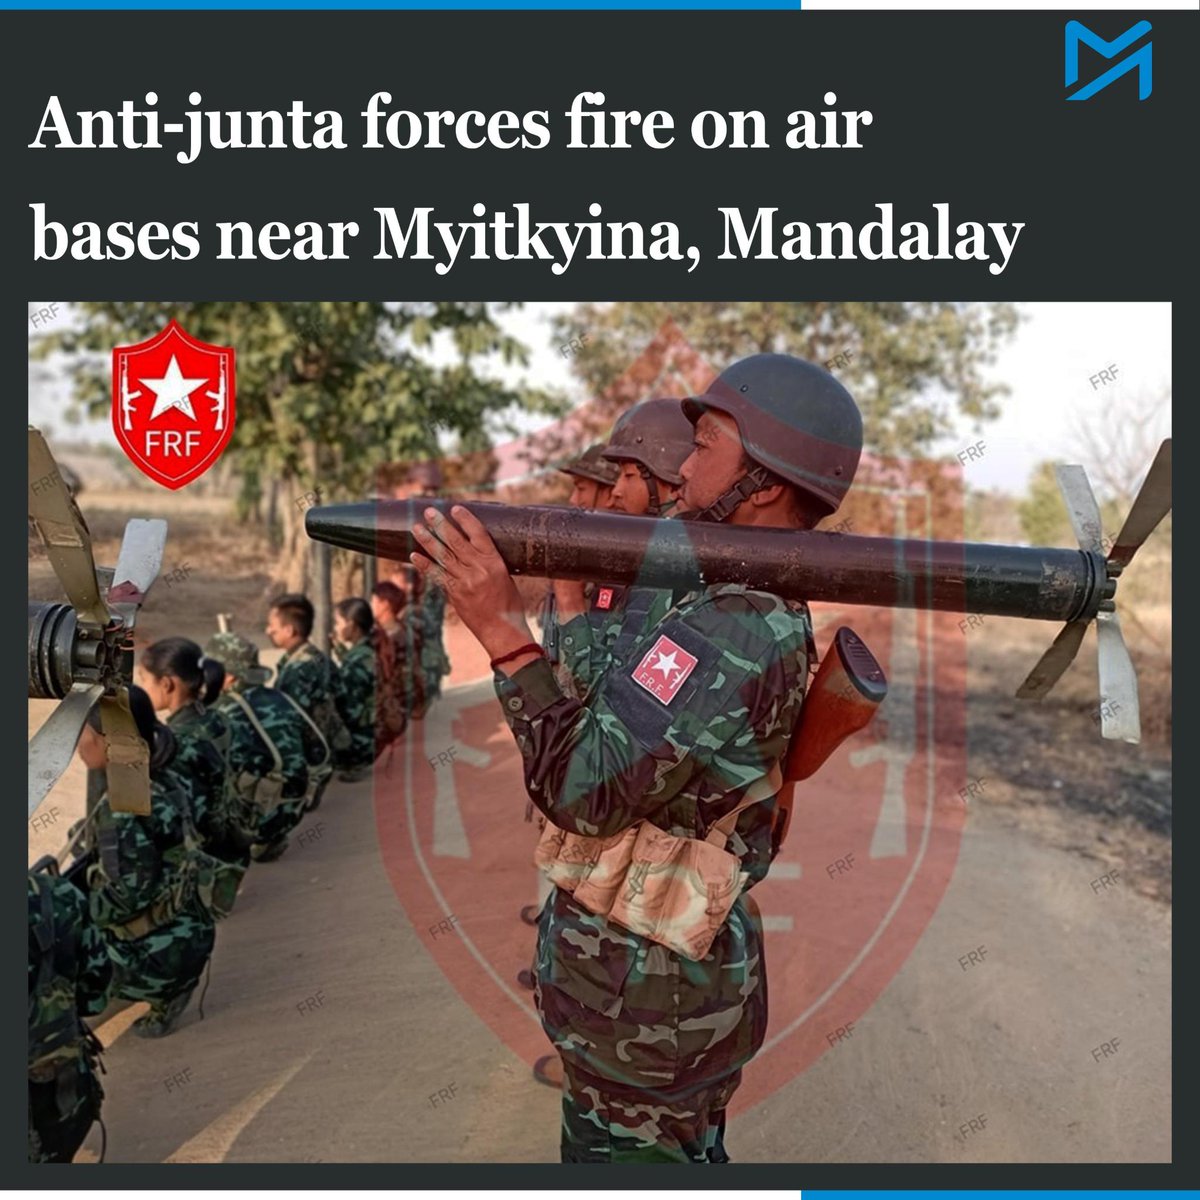 Unable to access anti-aircraft weapons, resistance forces have instead targeted planes stored at the bases from which the junta regularly launches indiscriminate airstrikes Read More: myanmar-now.org/en/news/anti-j… #Myanmar